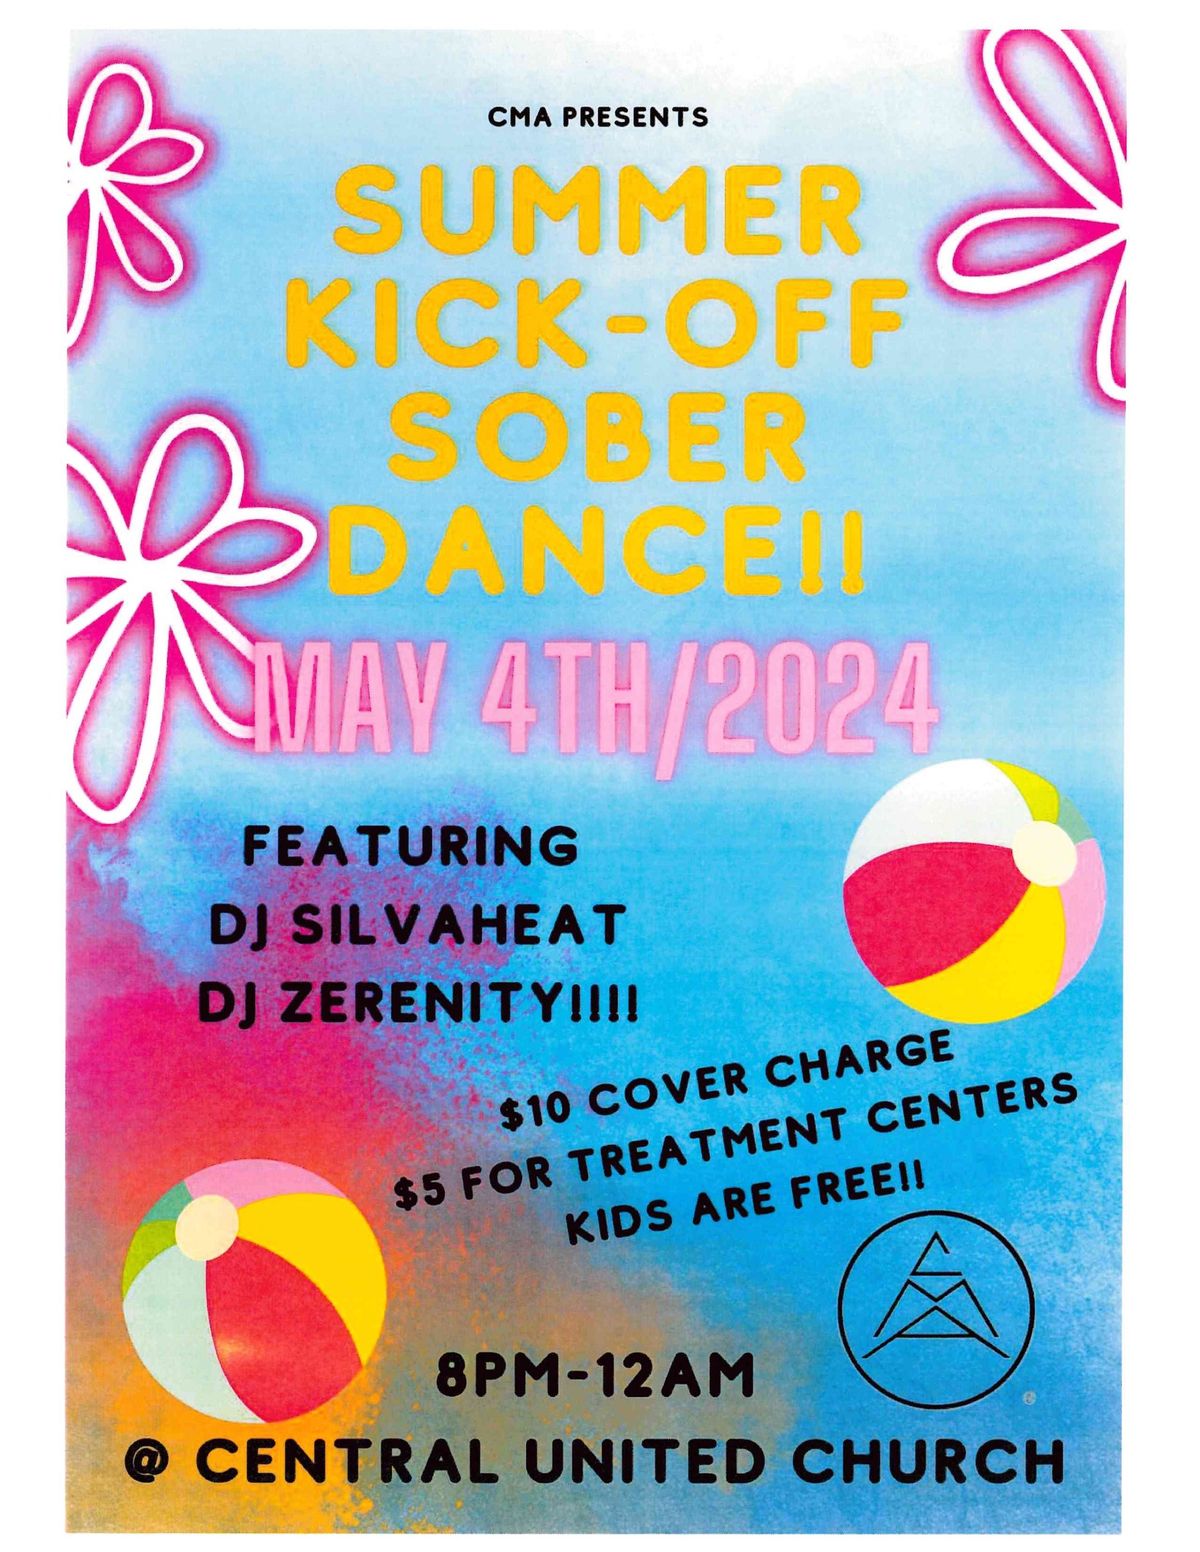 Summer Kick-Off Sober Dance Presented by CMA